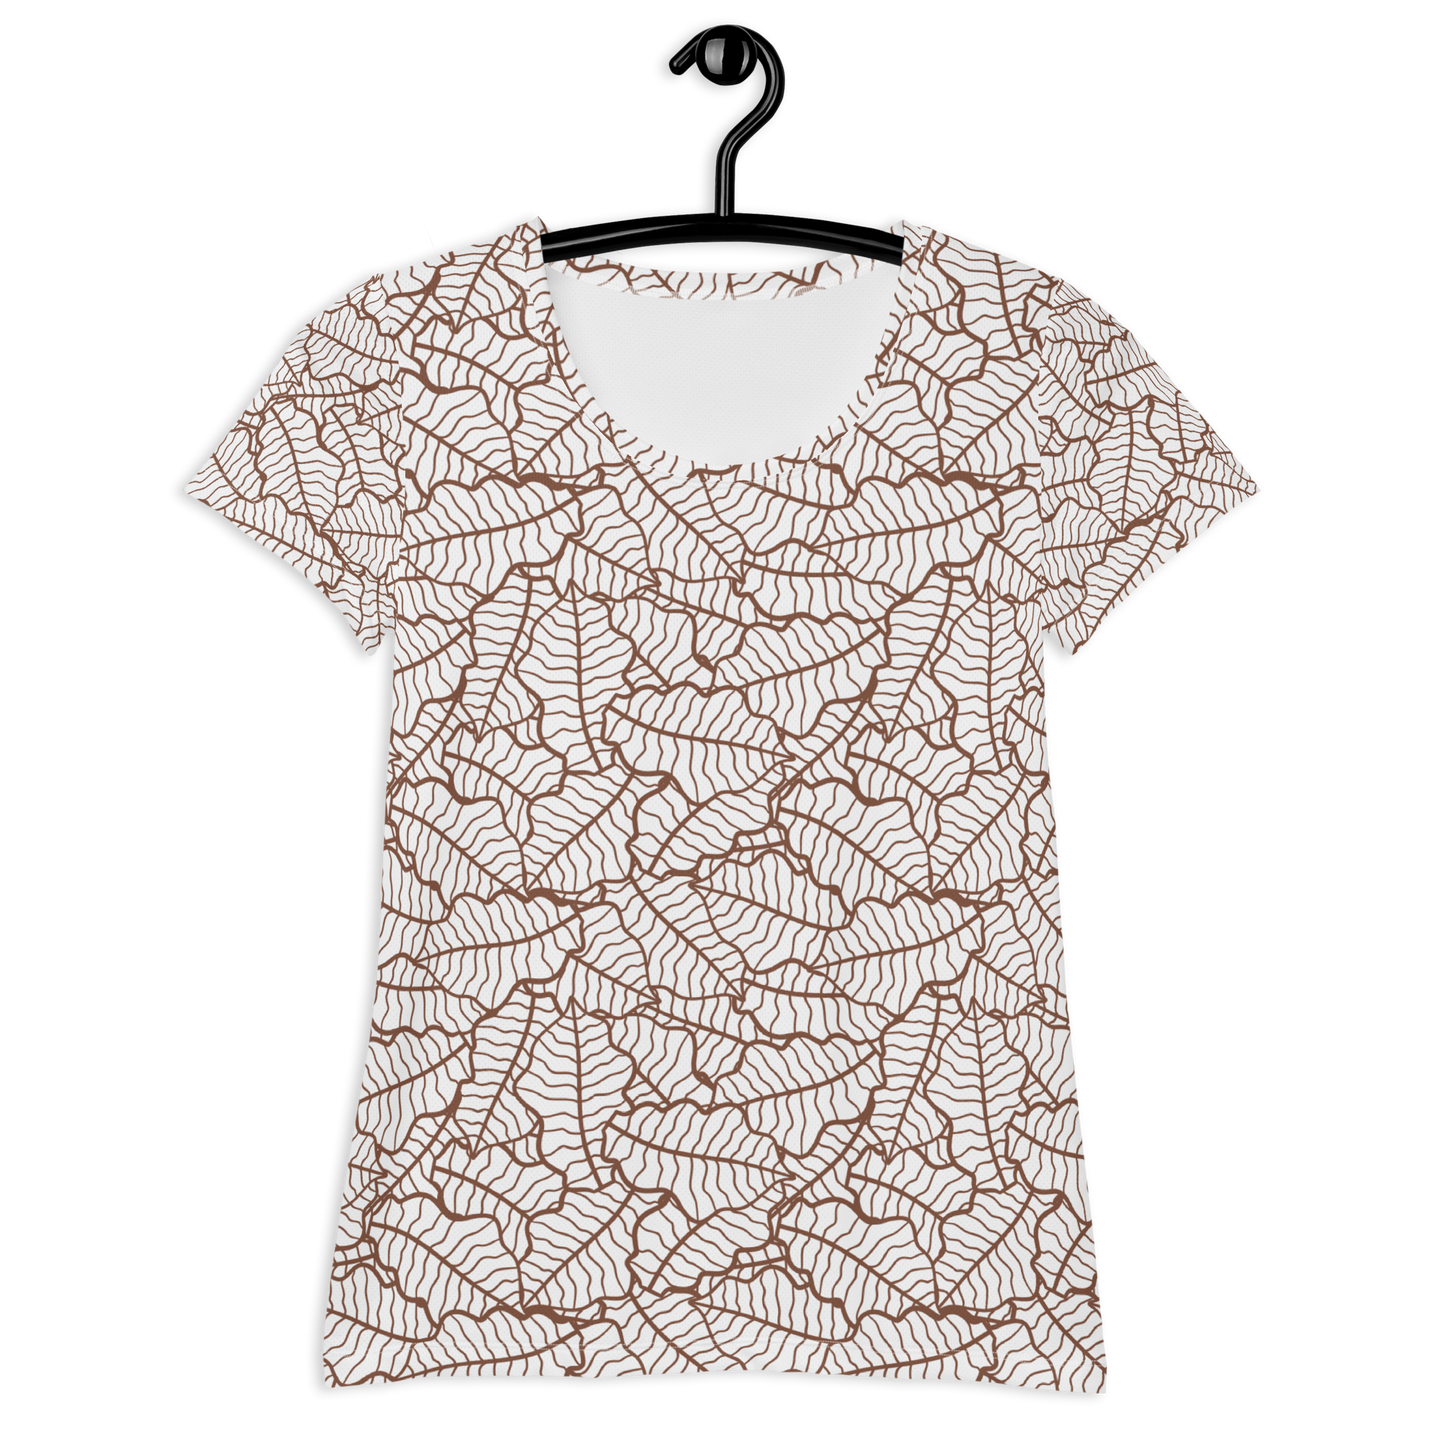 Colorful Fall Leaves | Seamless Patterns | All-Over Print Women's Athletic T-Shirt - #5